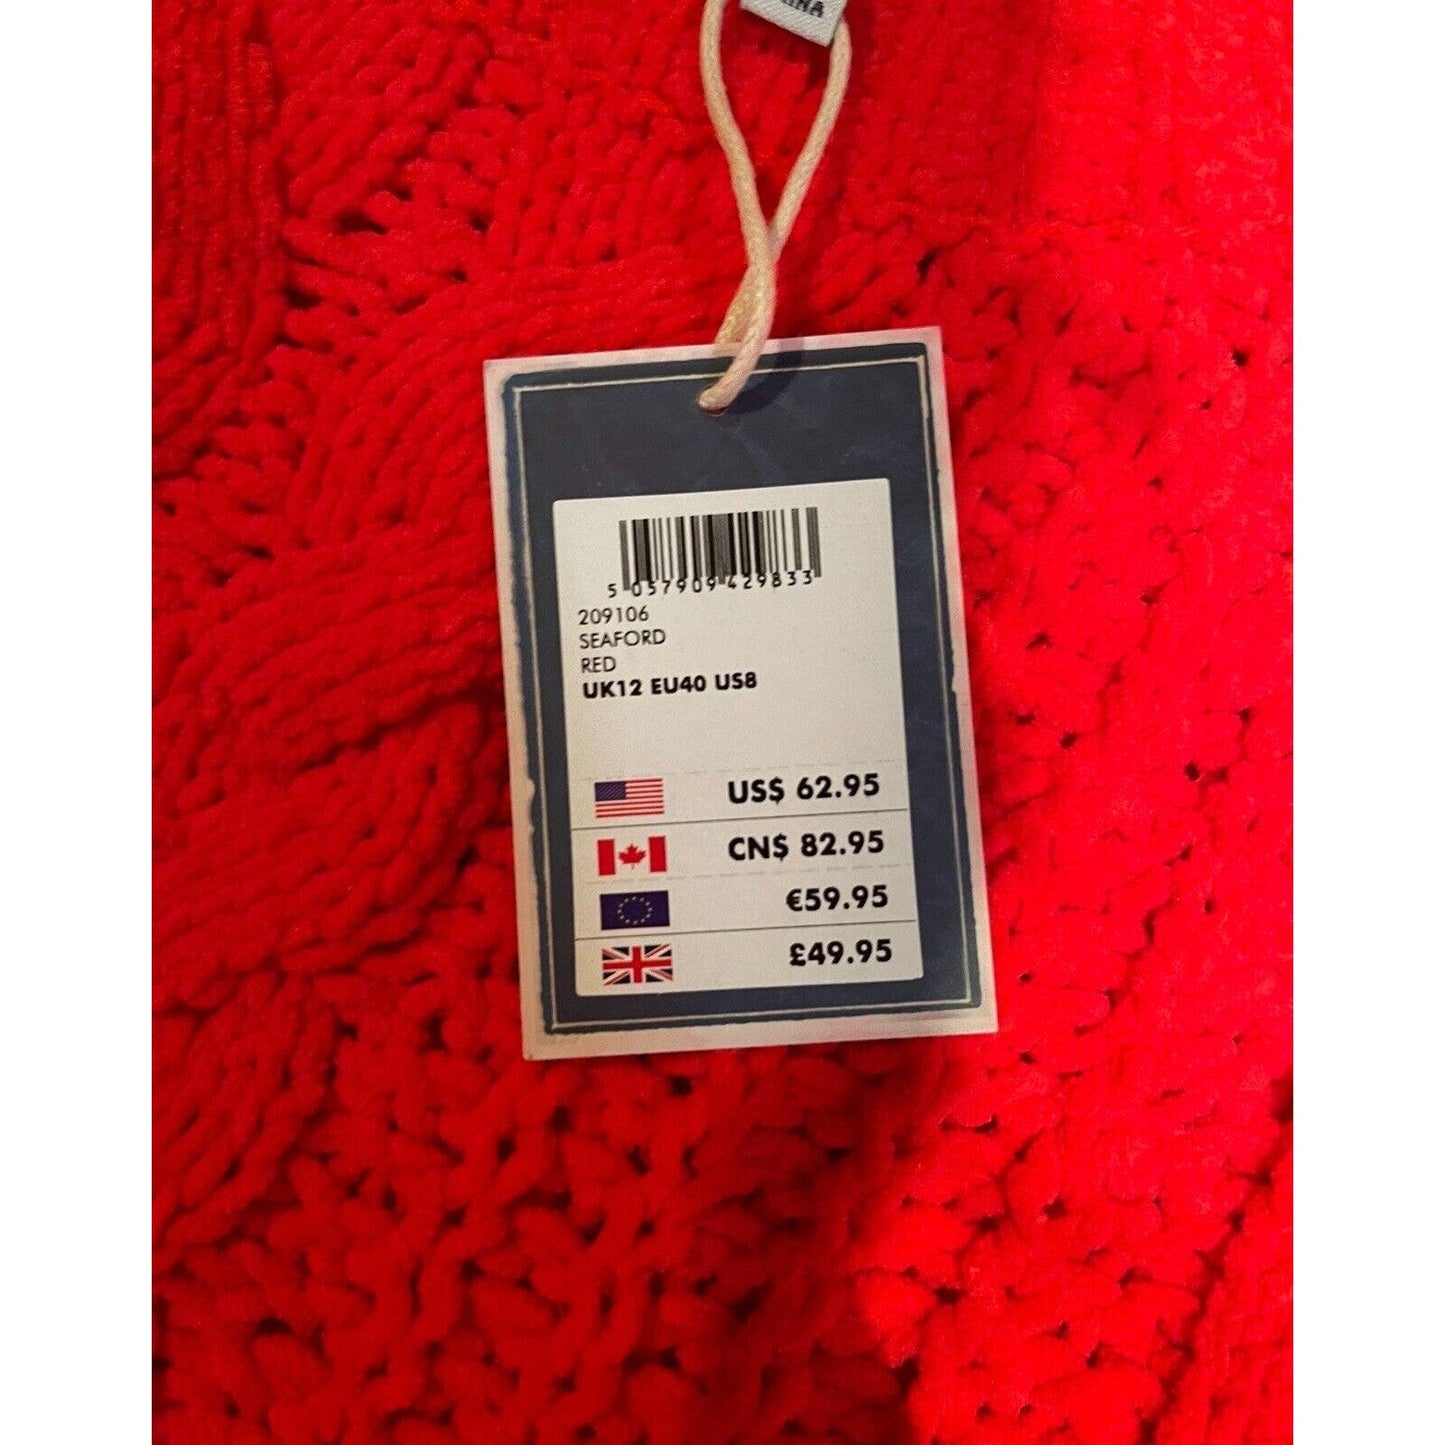 NWT Joules Knitwear Red Cable Knit Women’s Sweater Crew Neck Size 8 $62 MSRP